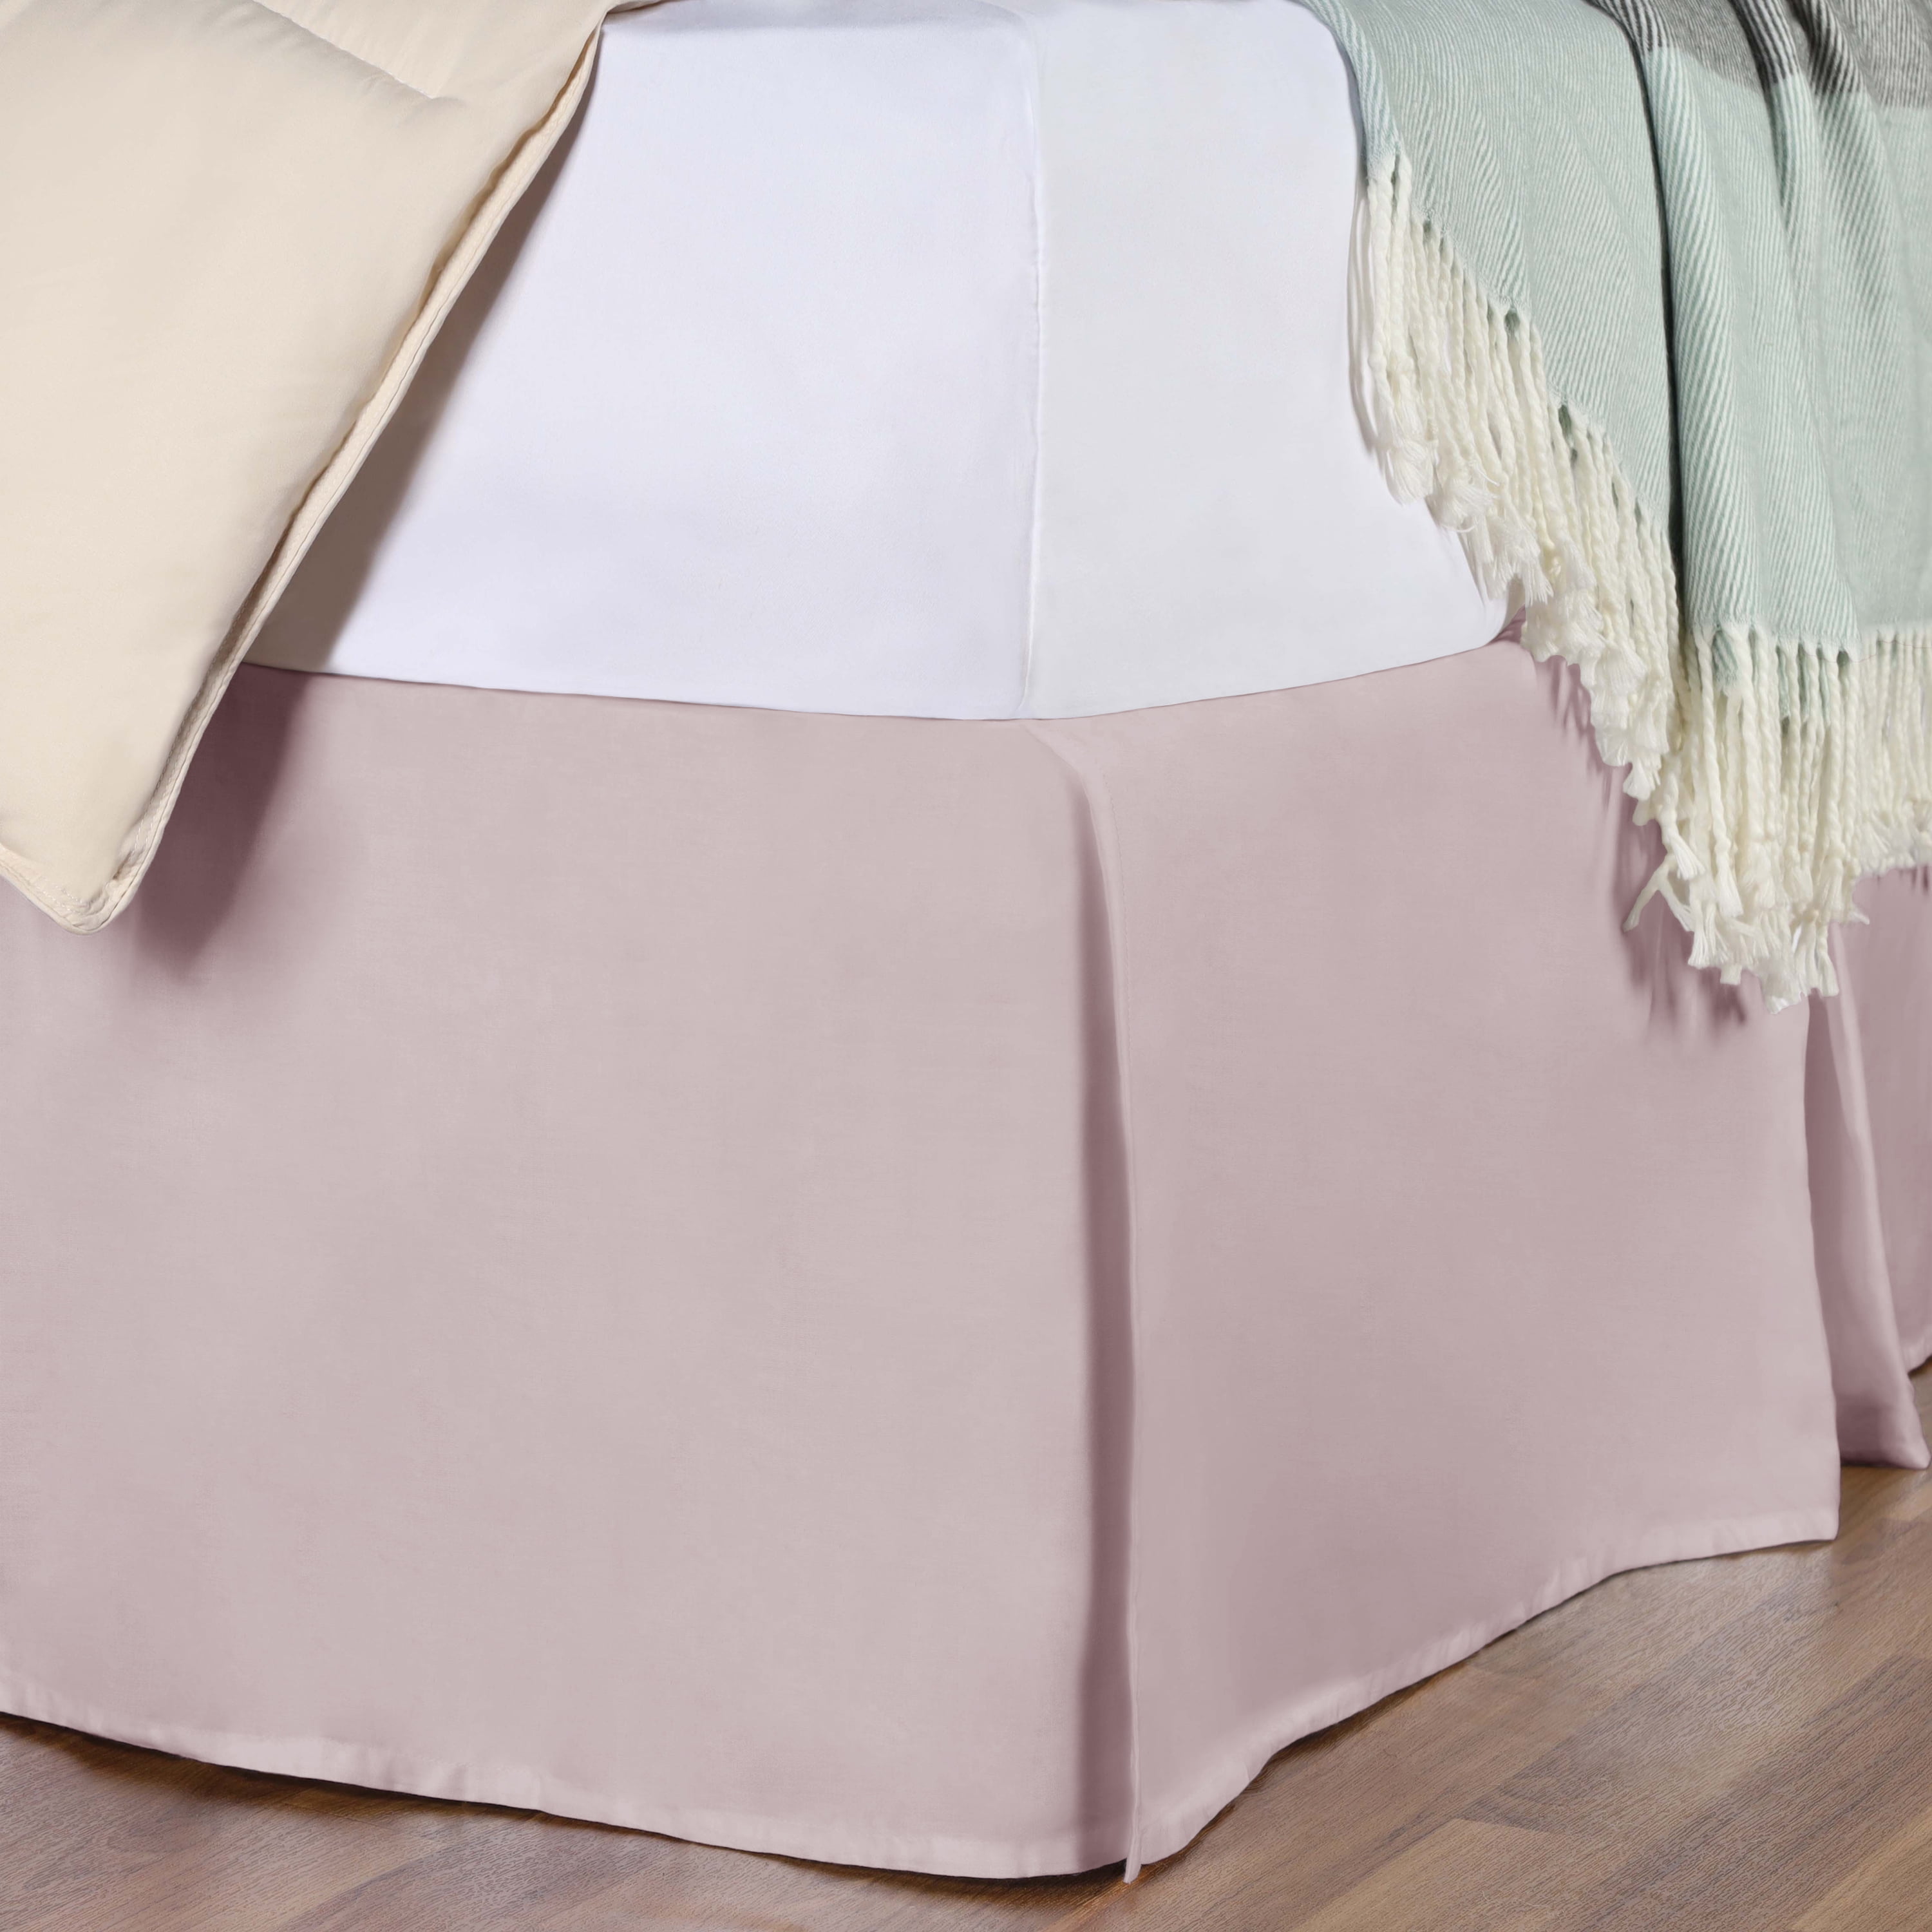 Details about   Bed Skirts Dorm Room Ruffle Dorm Bedskirt Twin-XL All Drop Mirofiber All Color 